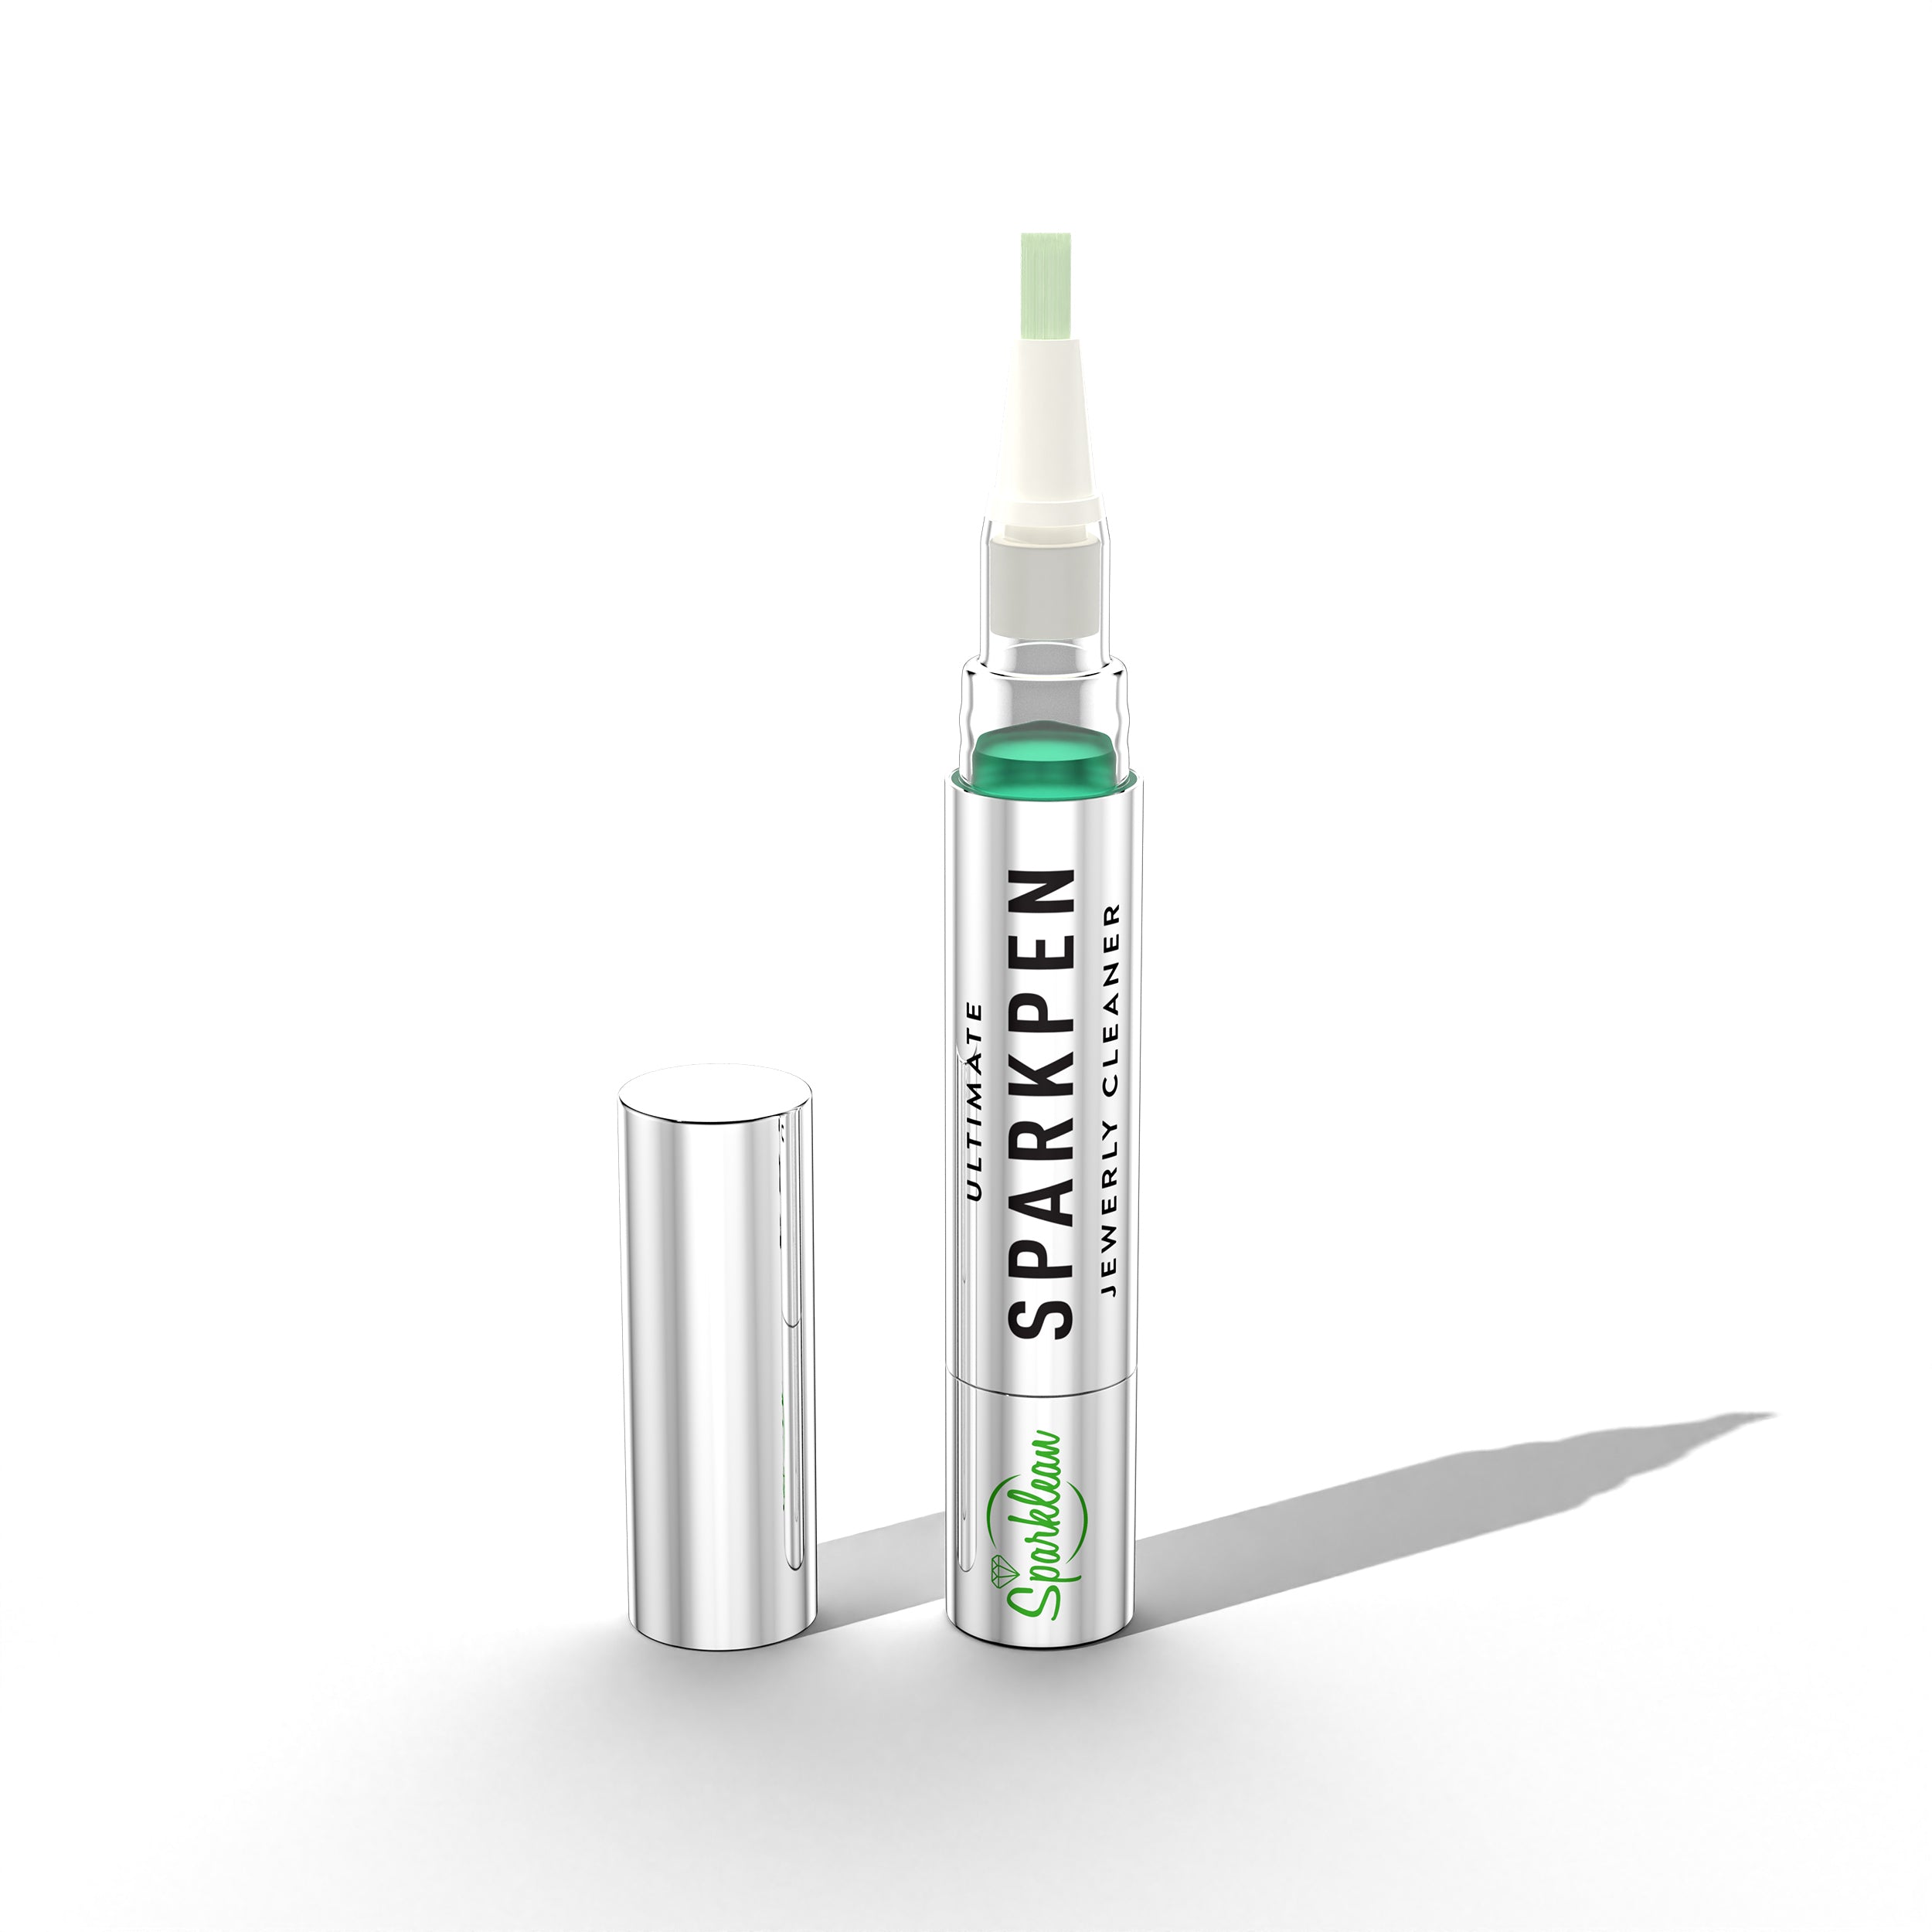 Sparklean Sparkpen: Natural, Non-Abrasive Fine-Tip Jewelry Cleaner – Ideal for Diamonds, Precious Metals, and Gemstones